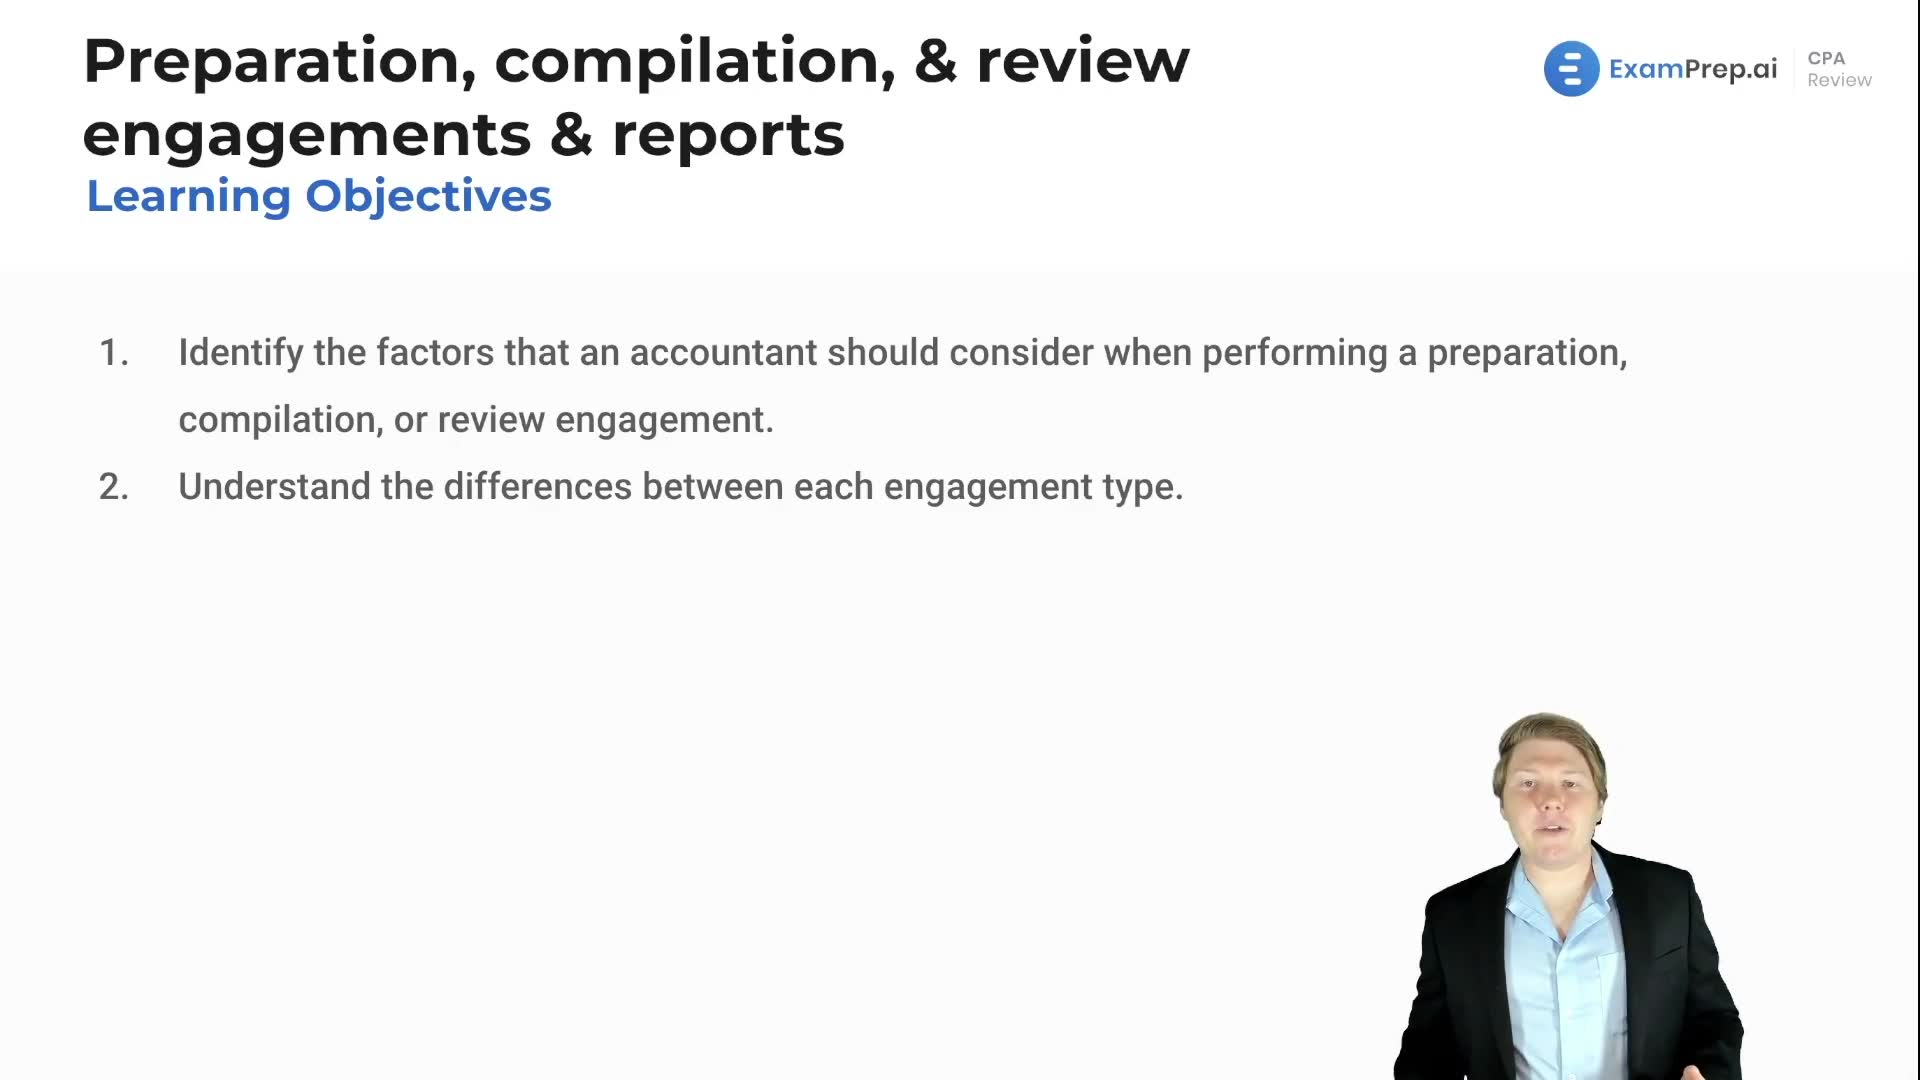 Preparation, Compilation, & Review Engagements & Reports Objectives lesson thumbnail